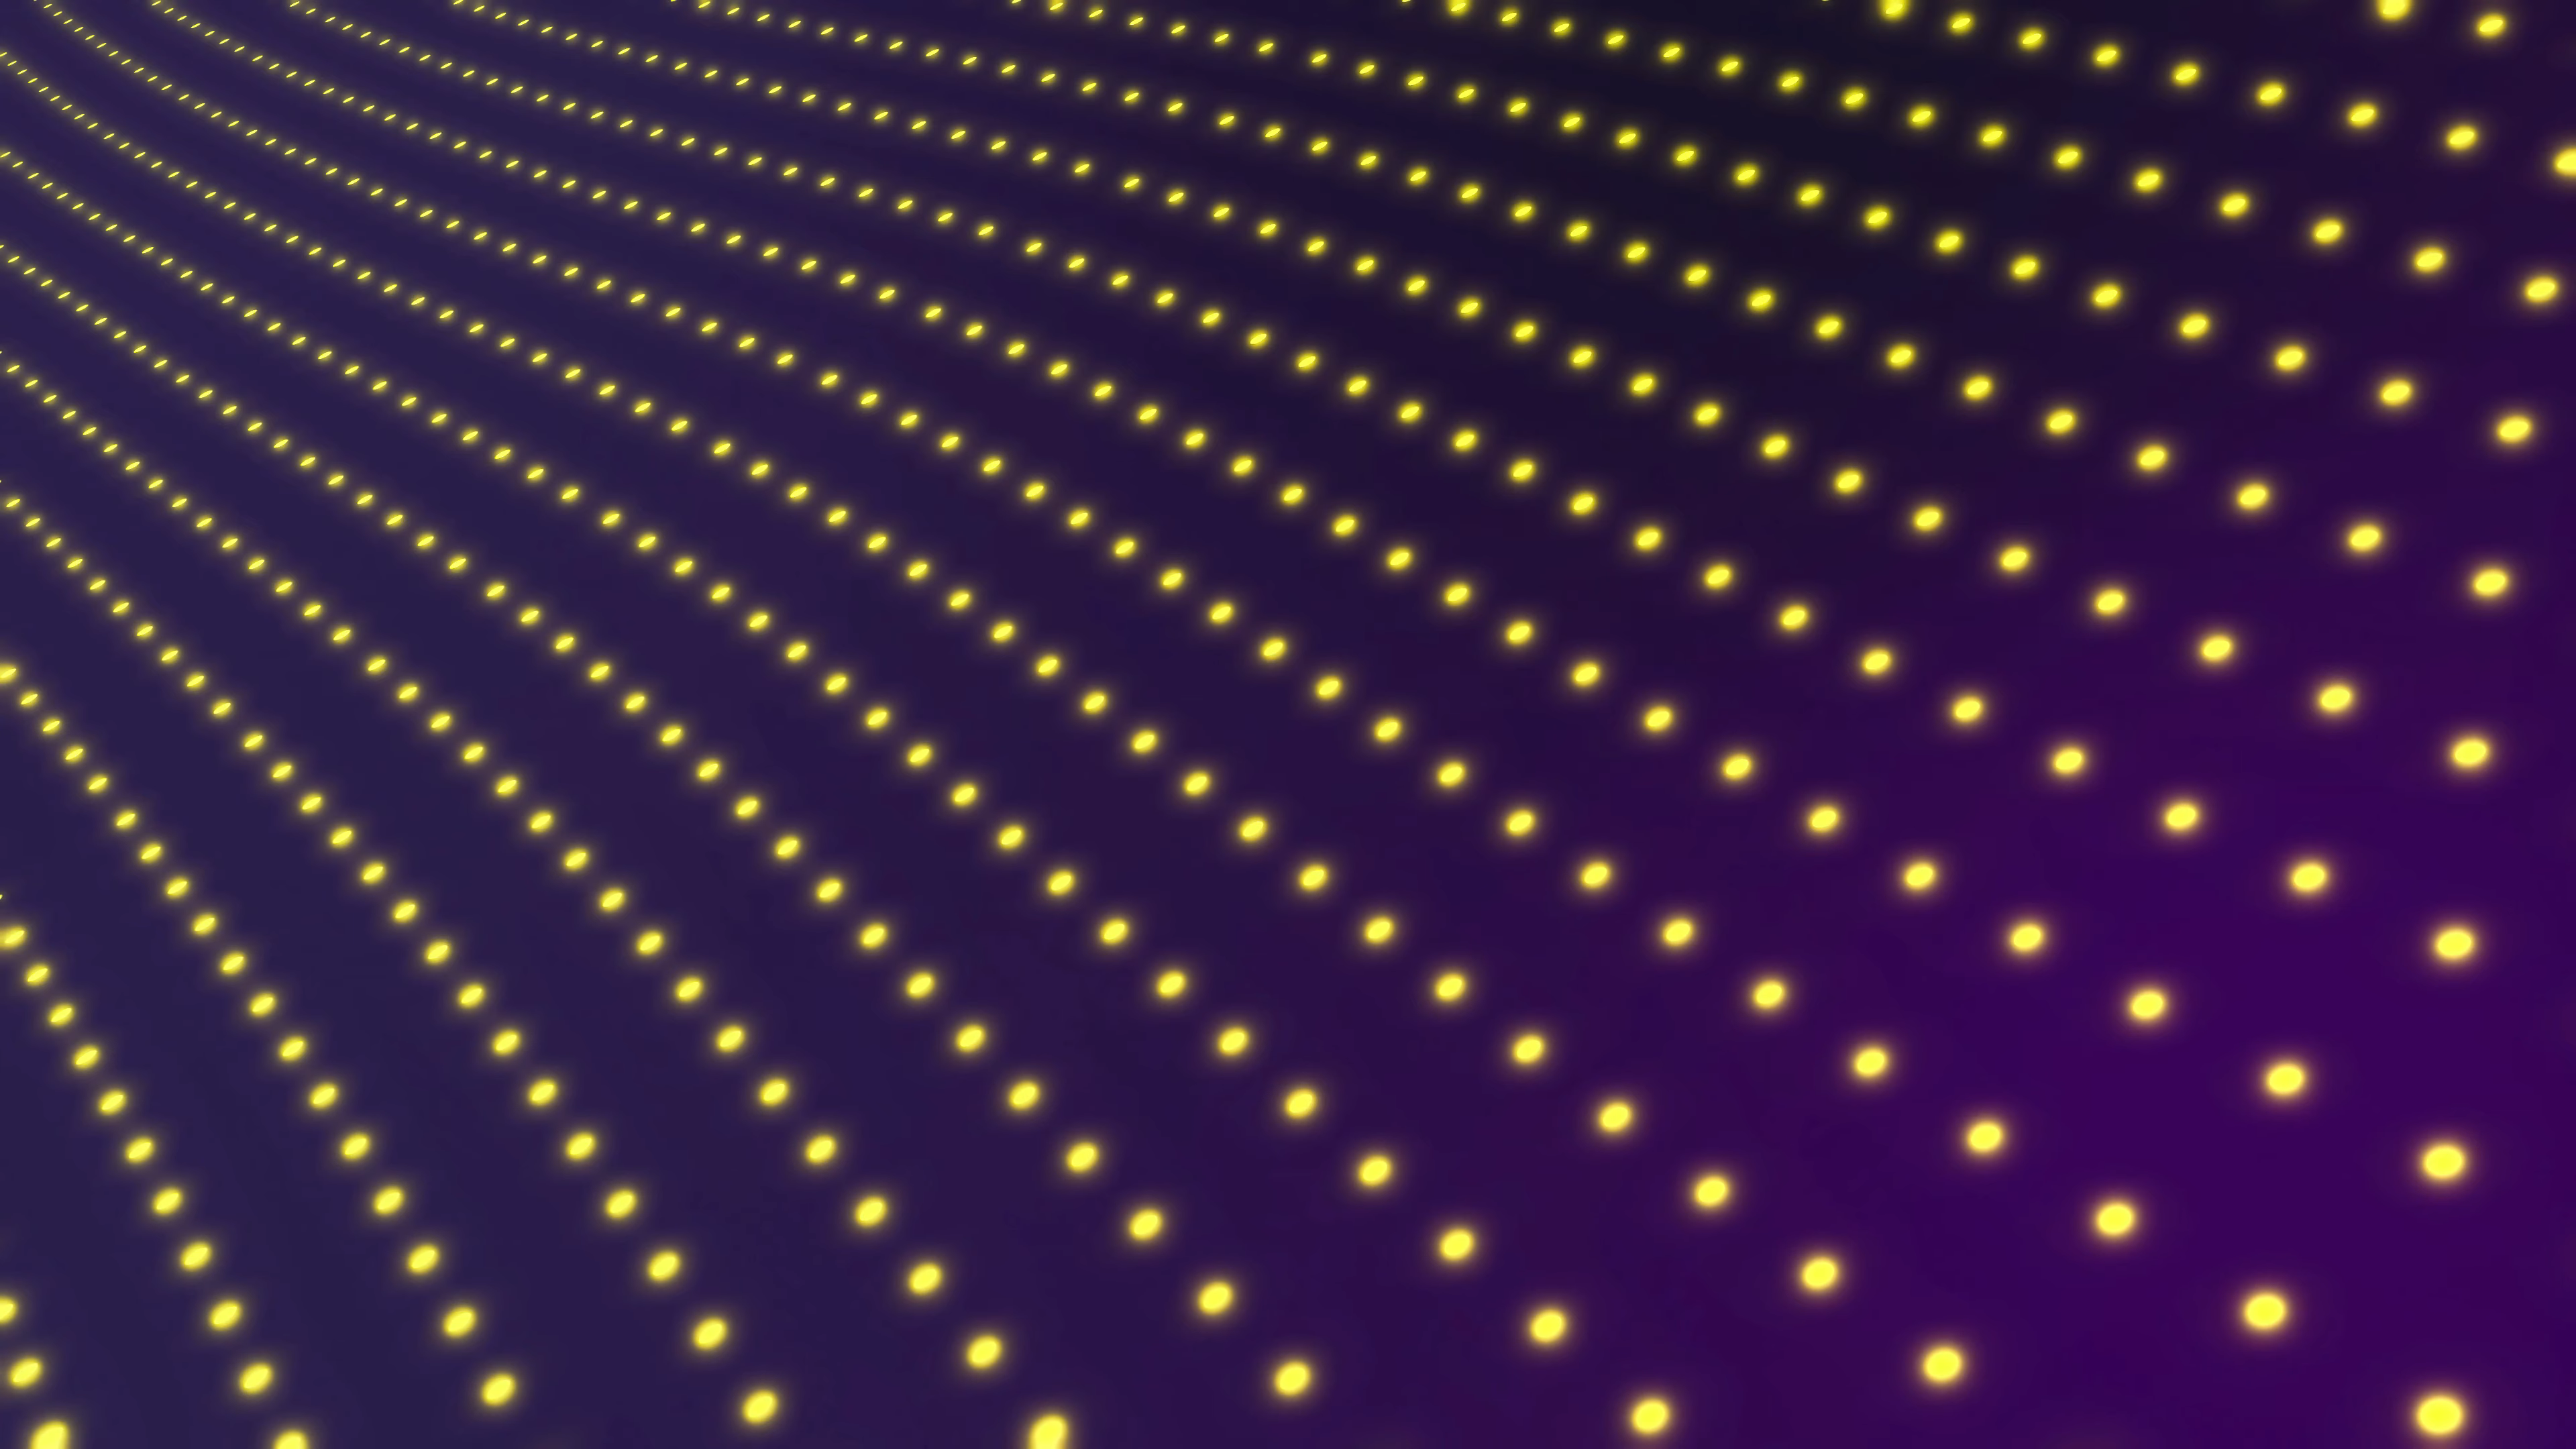 4K Yellow Dots Motion Background  || VFX Free To Use 4K Screensaver